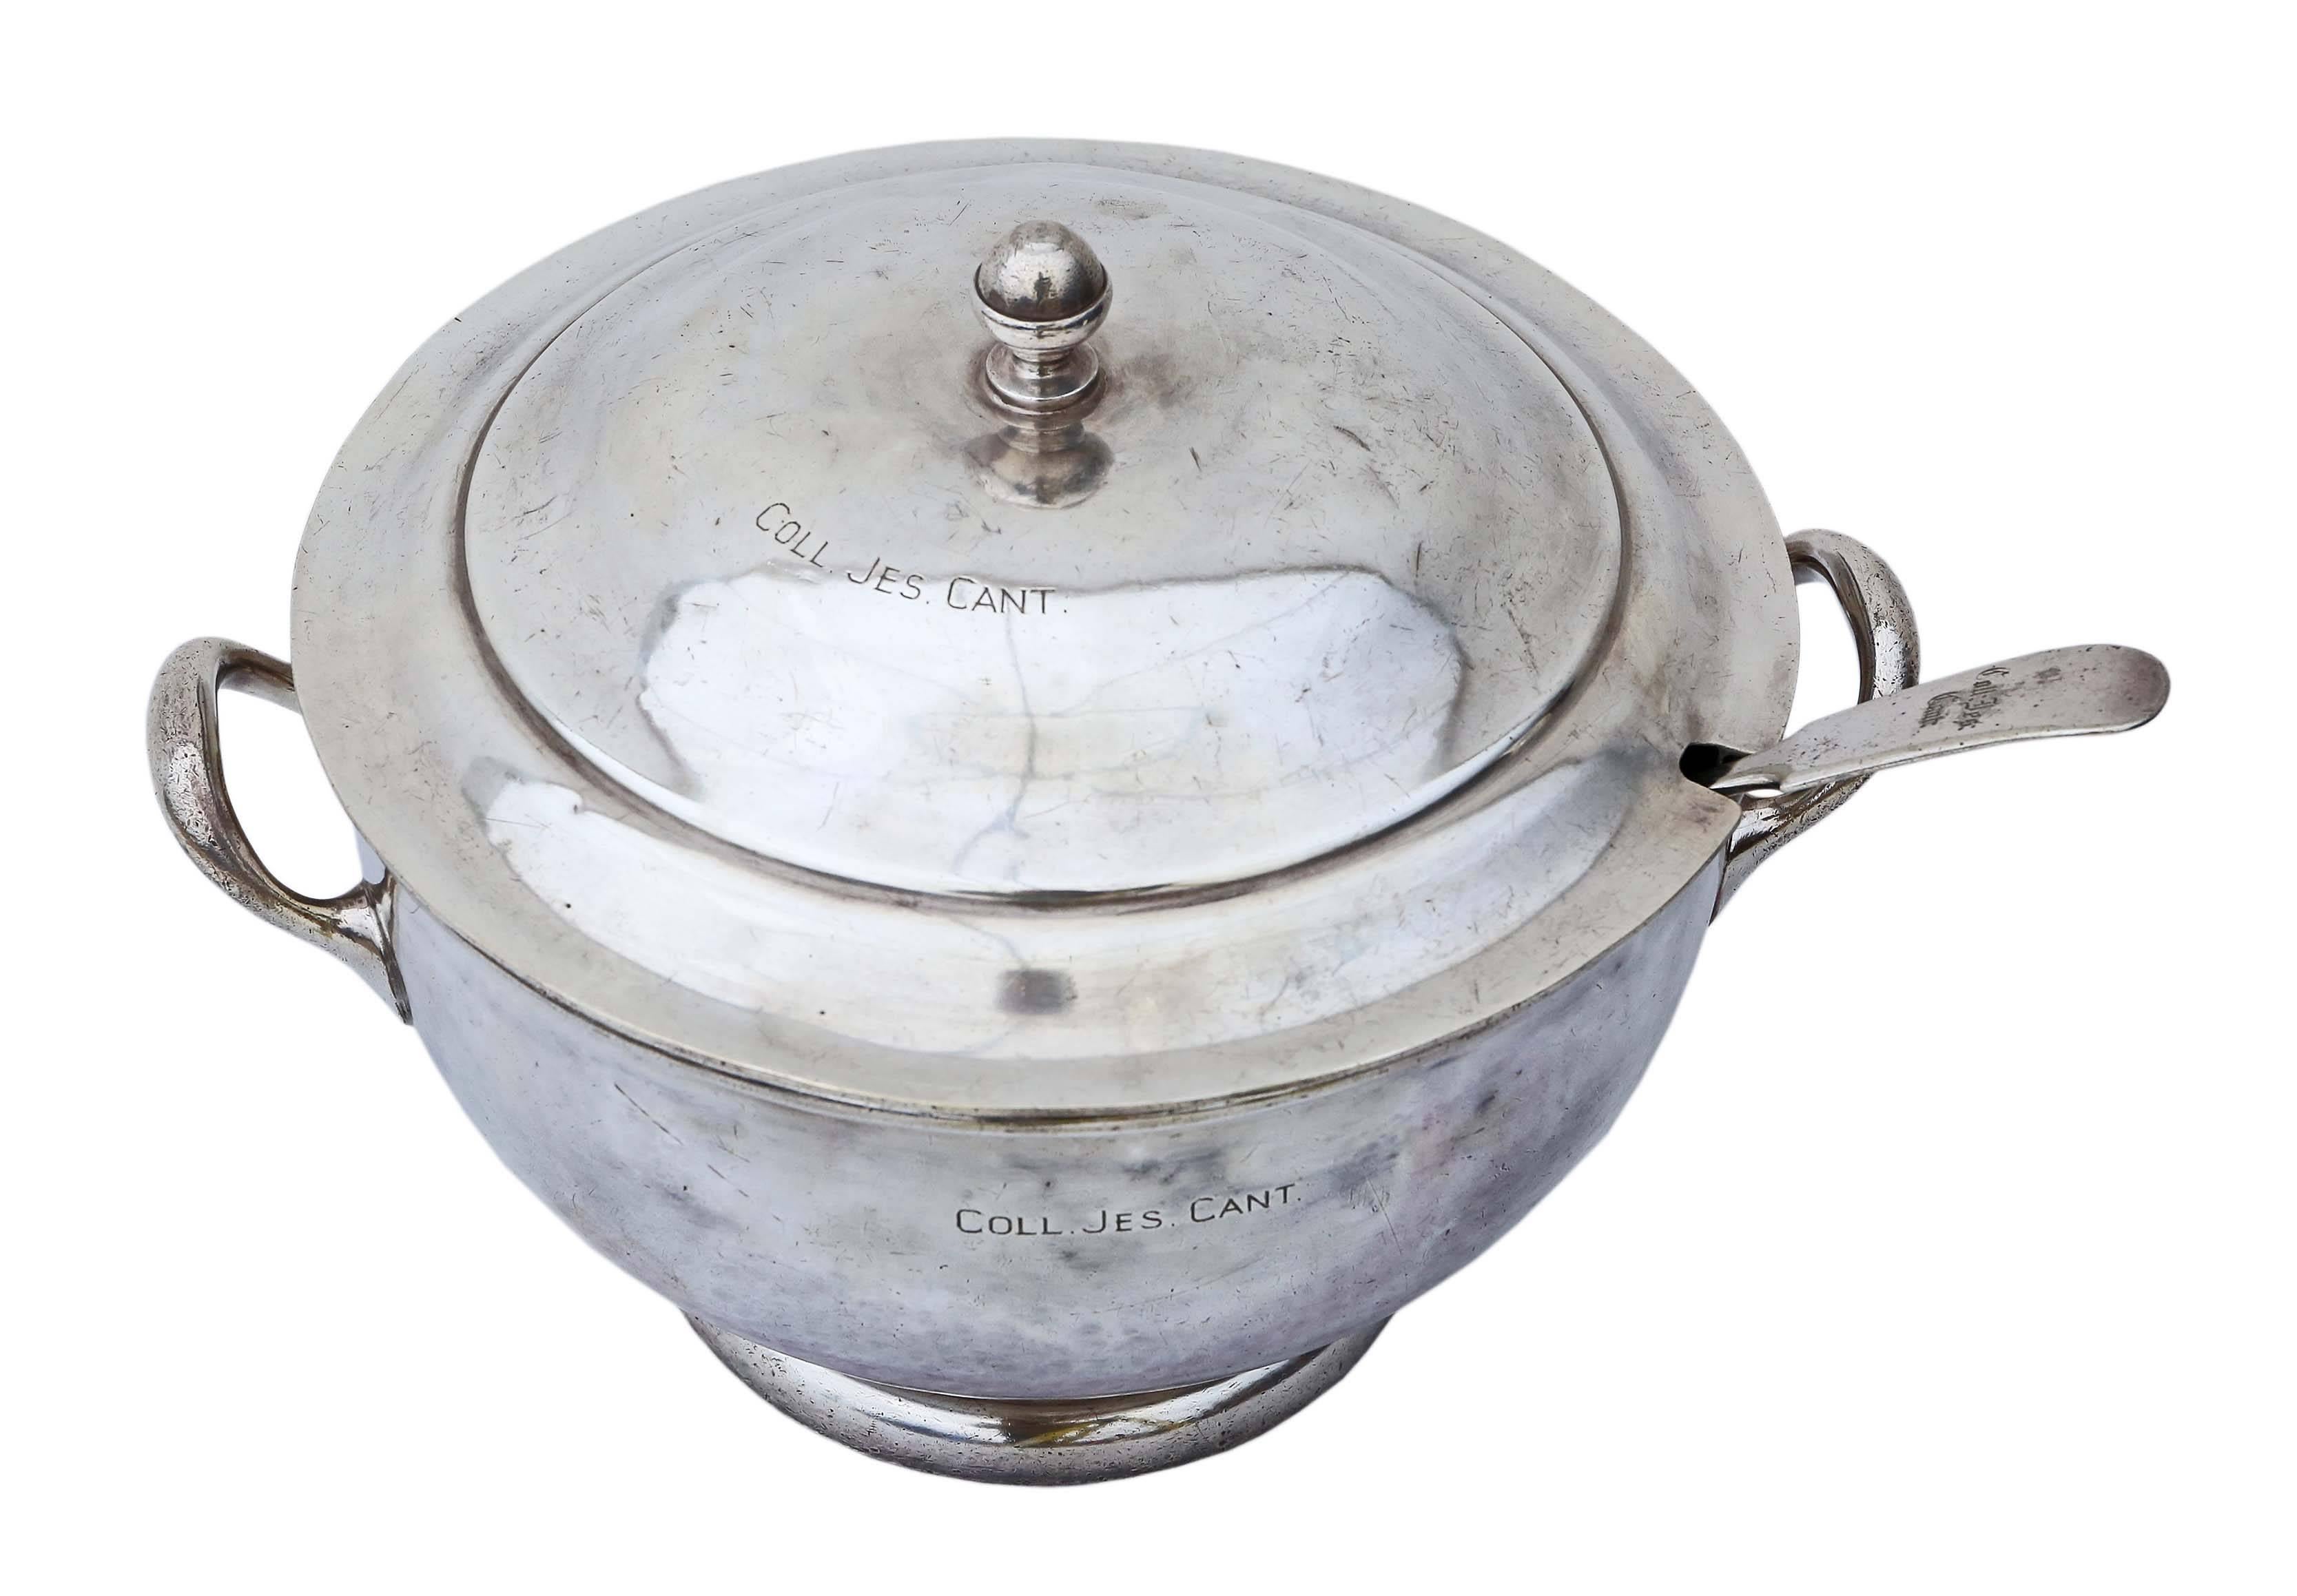 Antique large silver plated soup tureen or punch bowl. Mappin & Webb comes from the canteen at Jesus College Cambridge (engraved COLL. JES. CANT). Includes lid and ladle. Mid-20th century.

Well used, as one might expect from the provenance but it